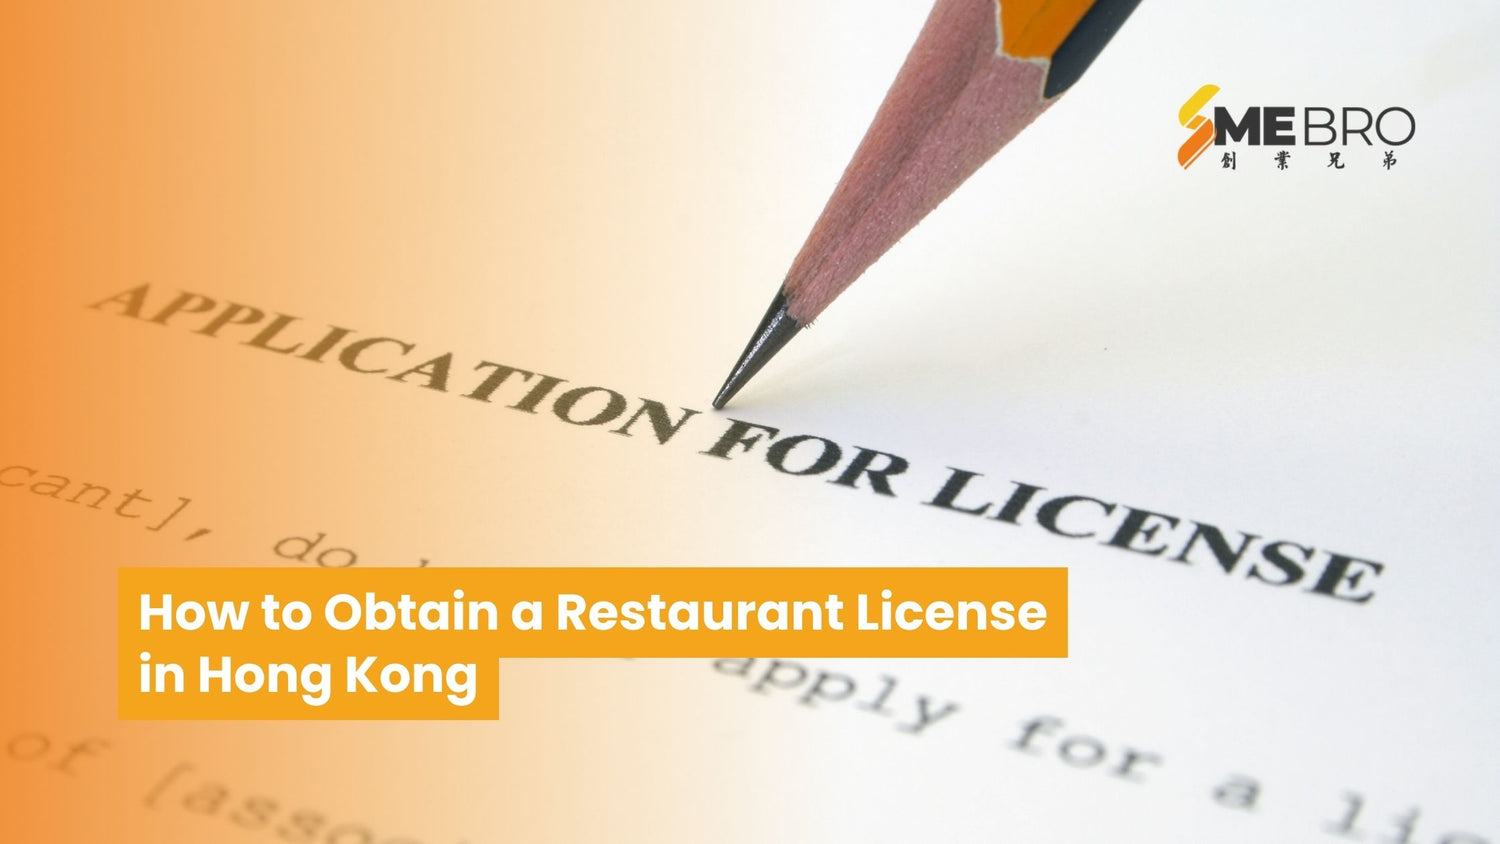 How to Obtain a Restaurant License in Hong Kong